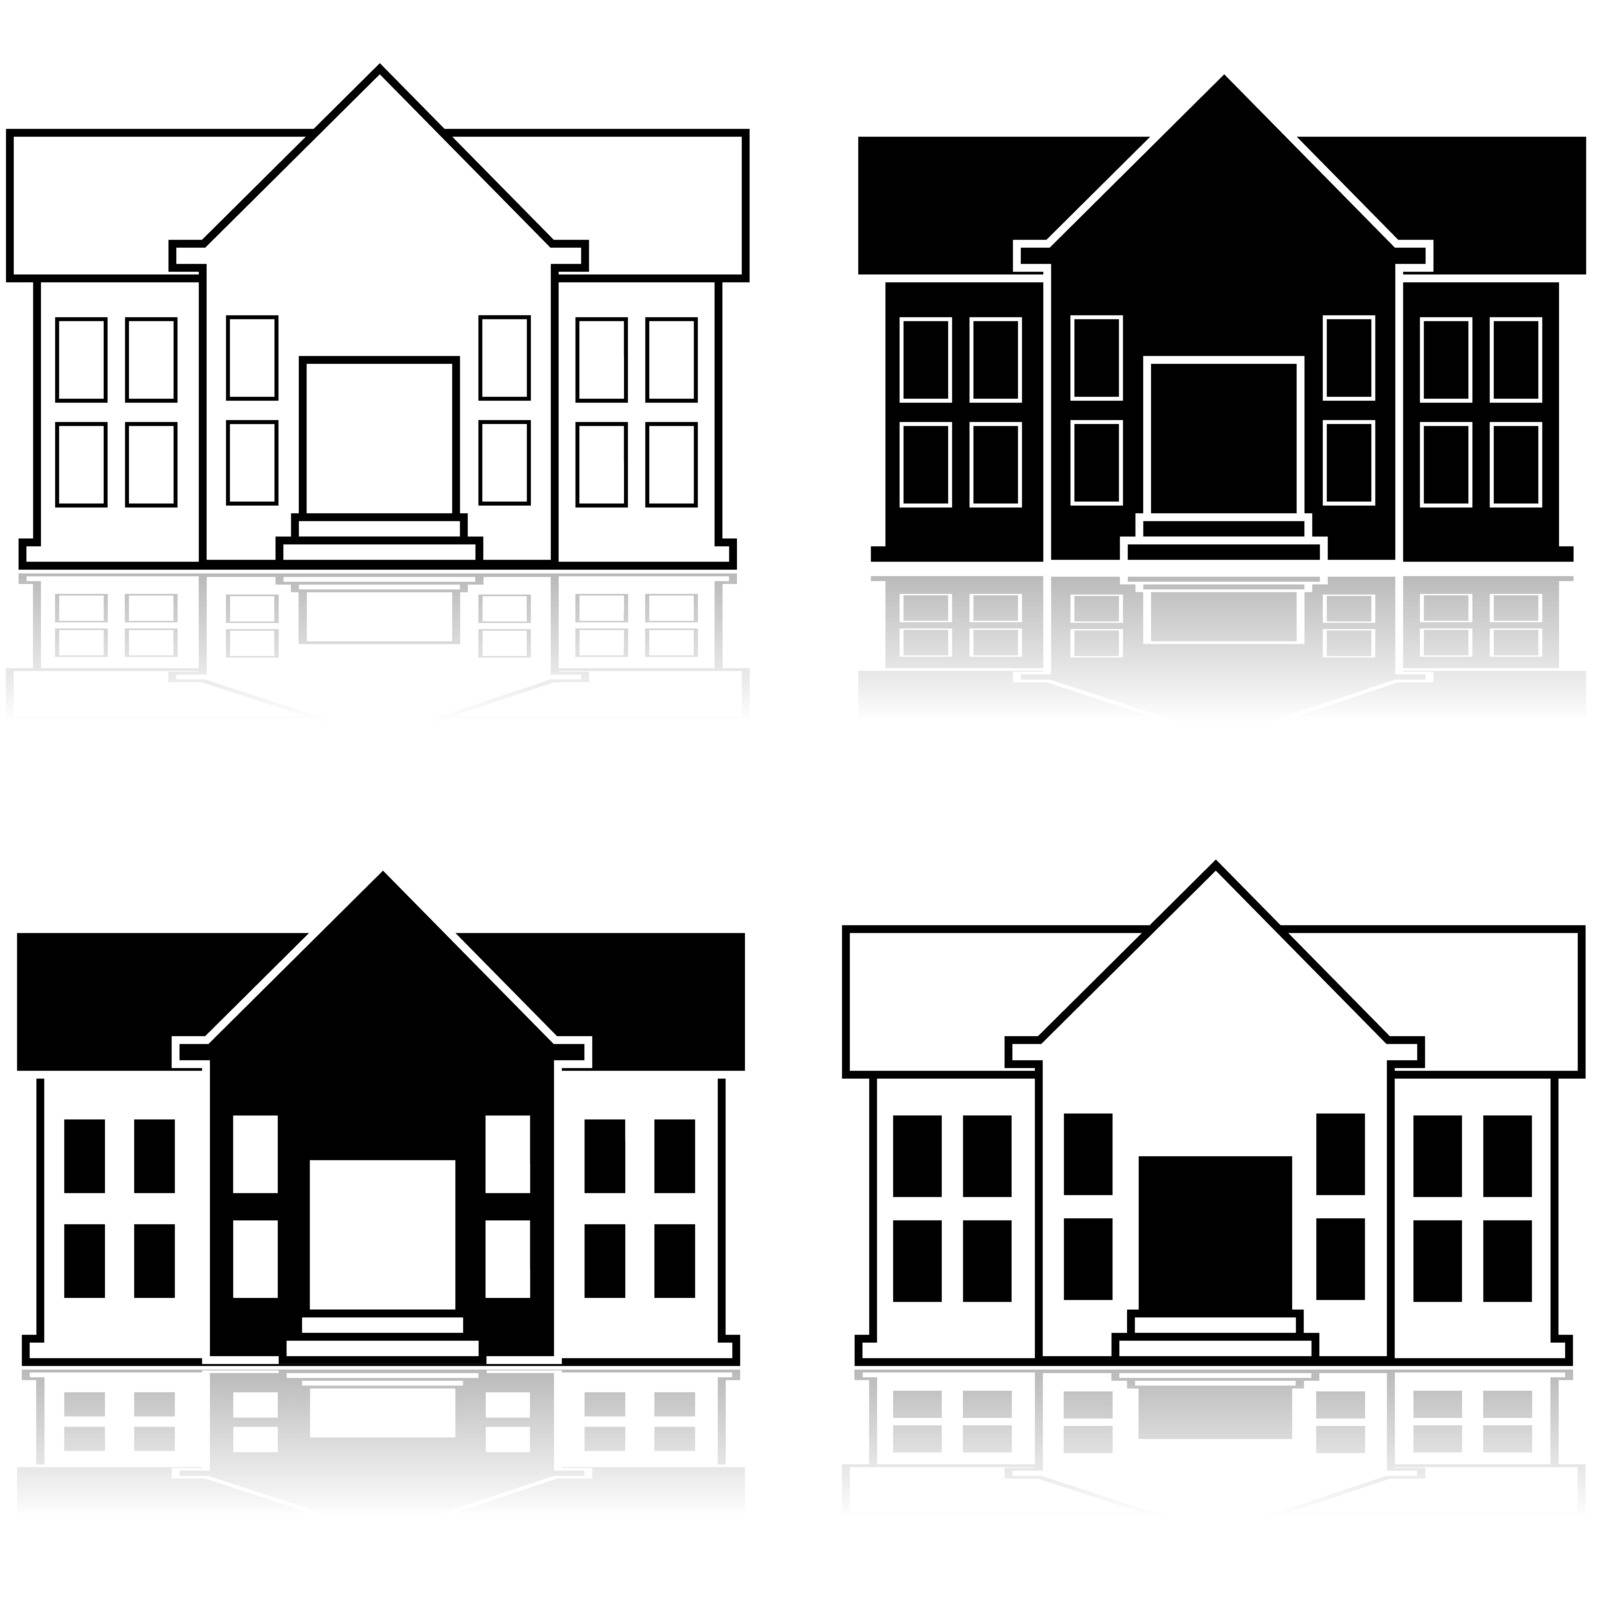 Icon illustration showing a fancy house or school in four different color schemes